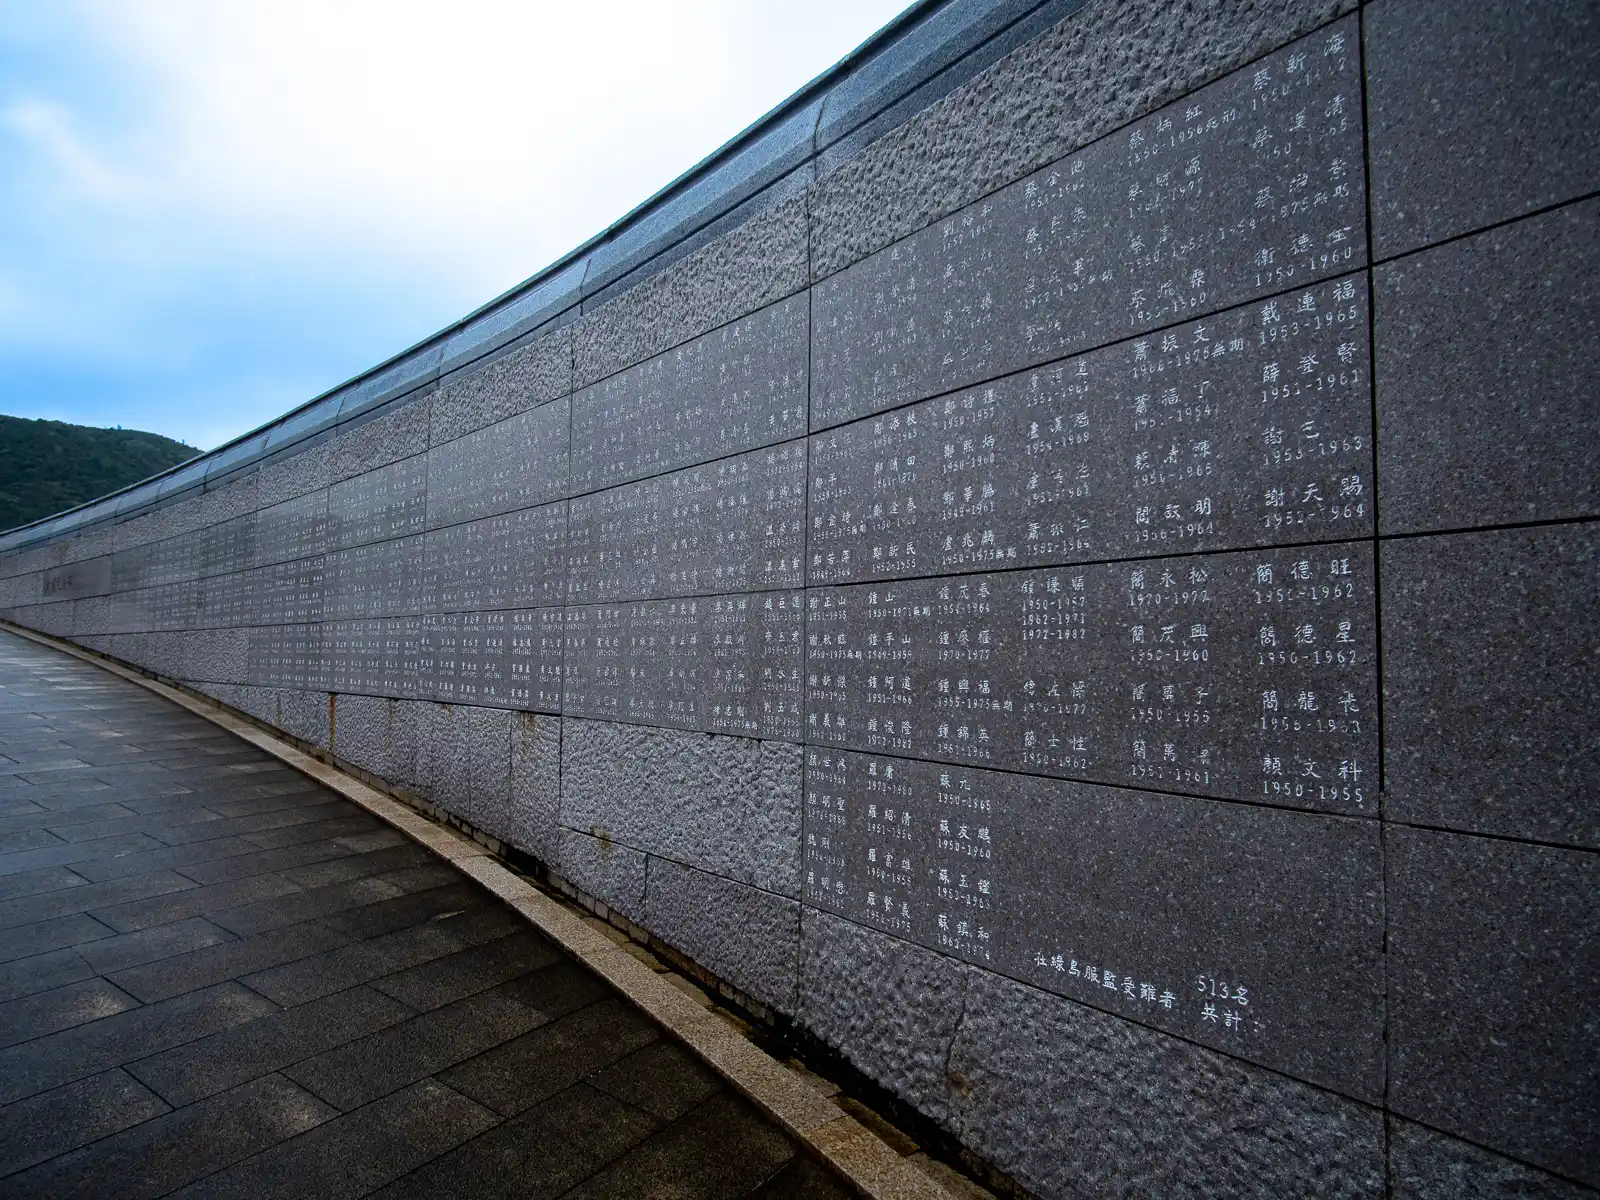 Hundreds of names along with birth and death dates are engraved on a long circular wall.